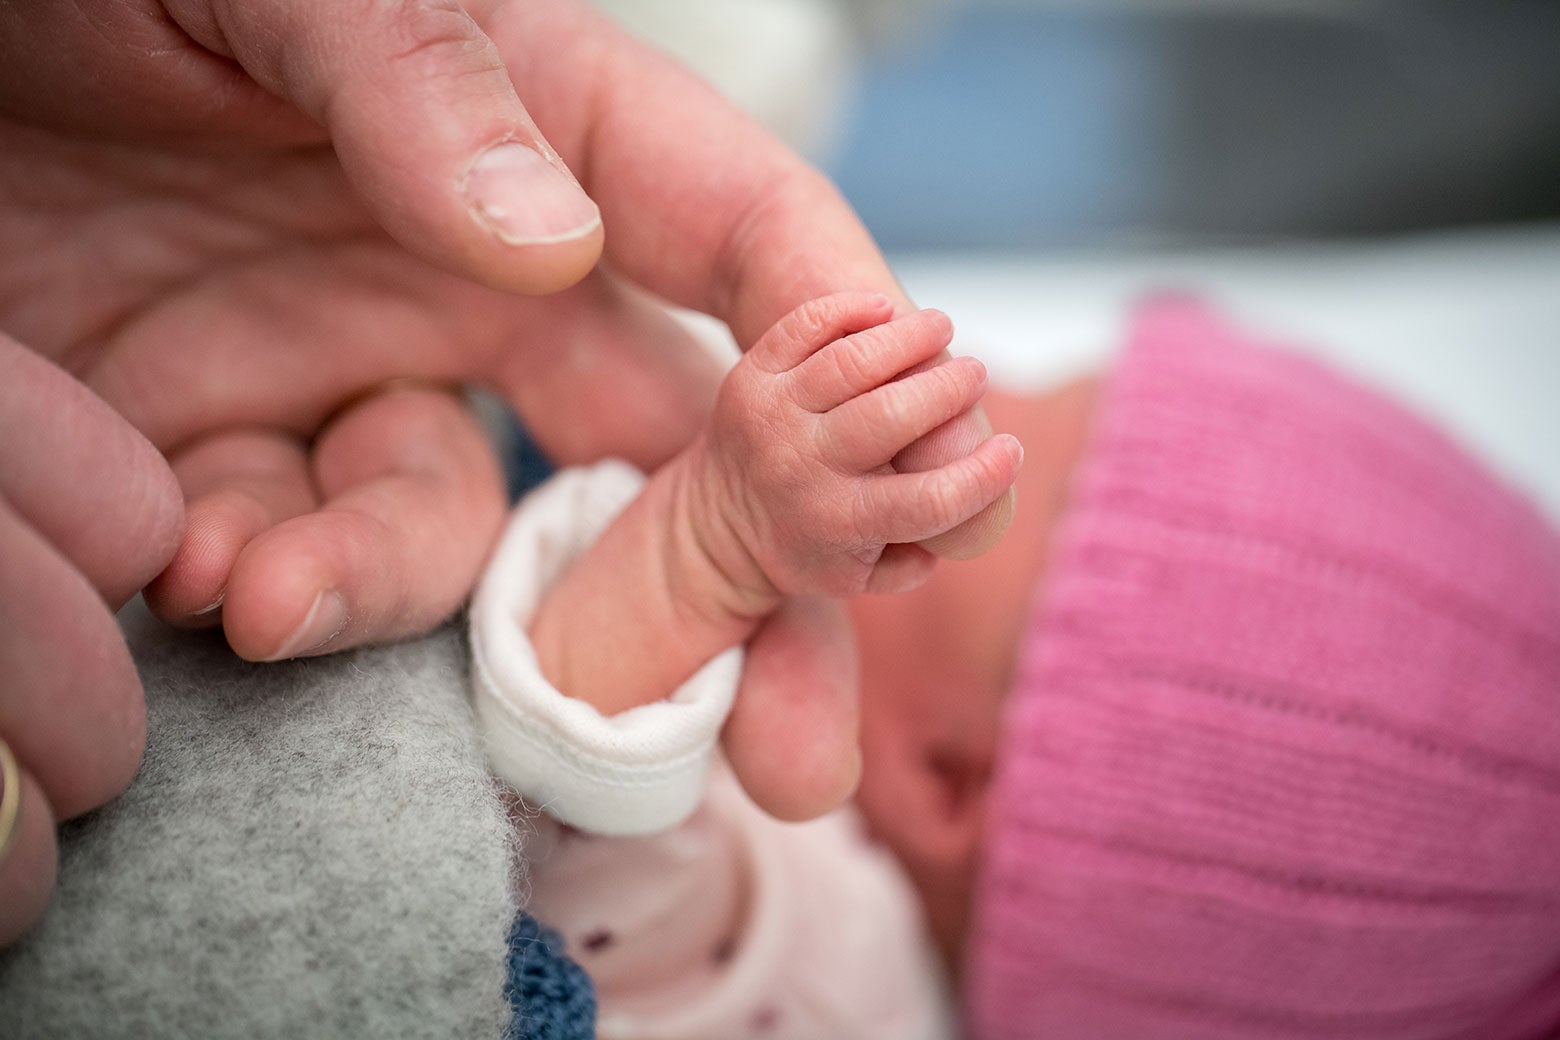 An adult finger lifts up a baby's hand.